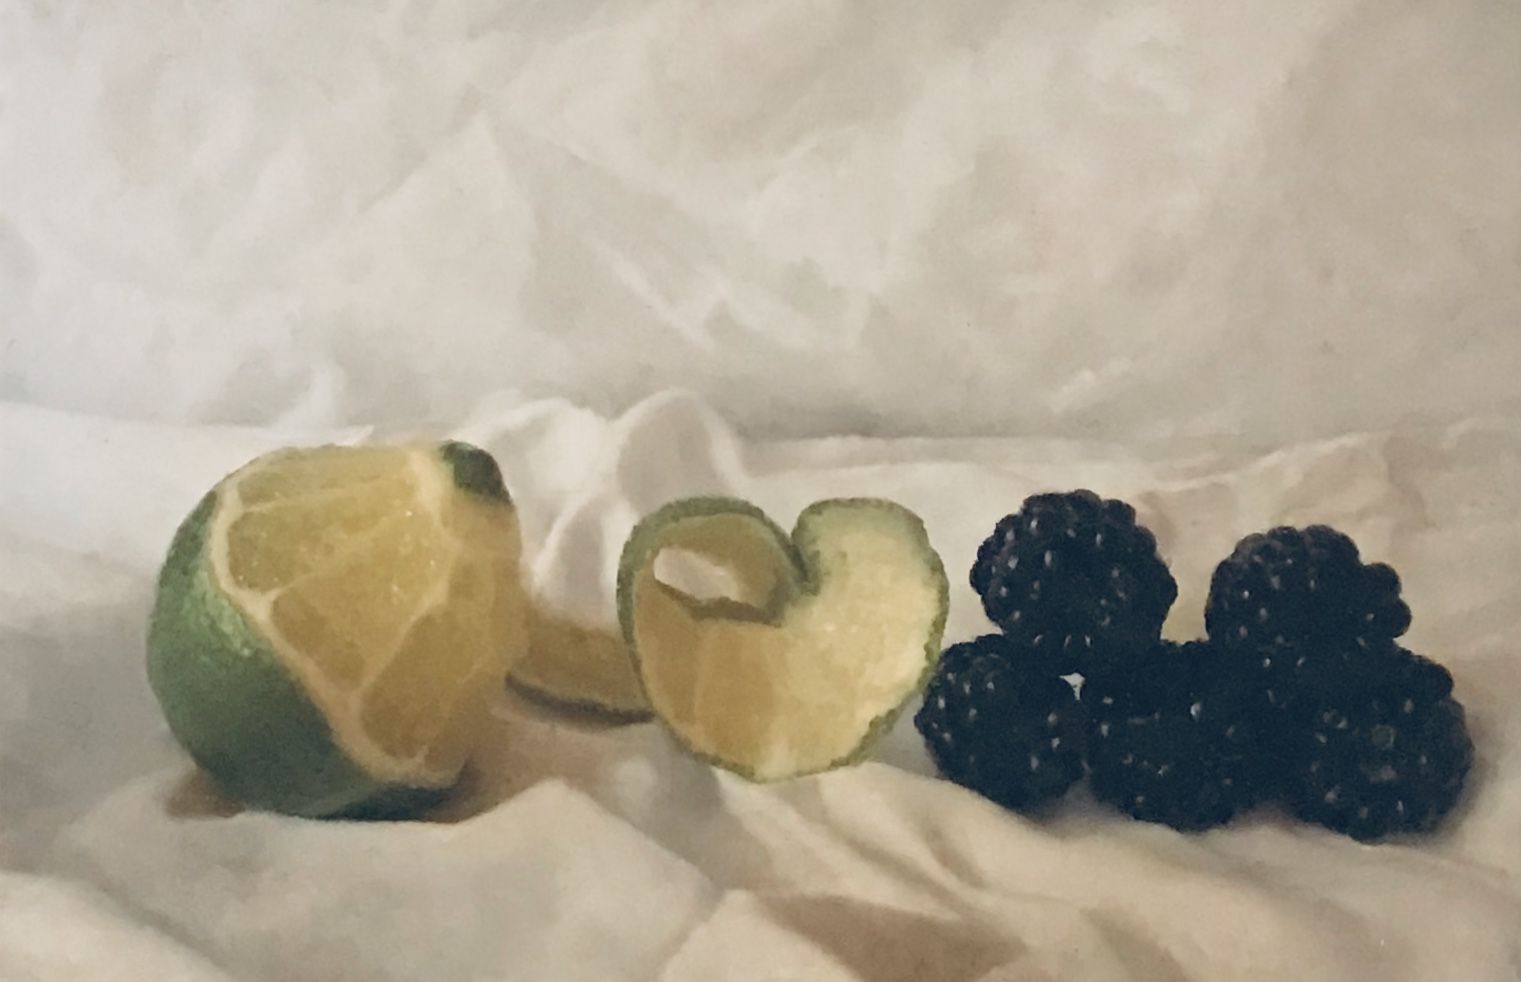 Lime and Blackberries by Kate Verrion